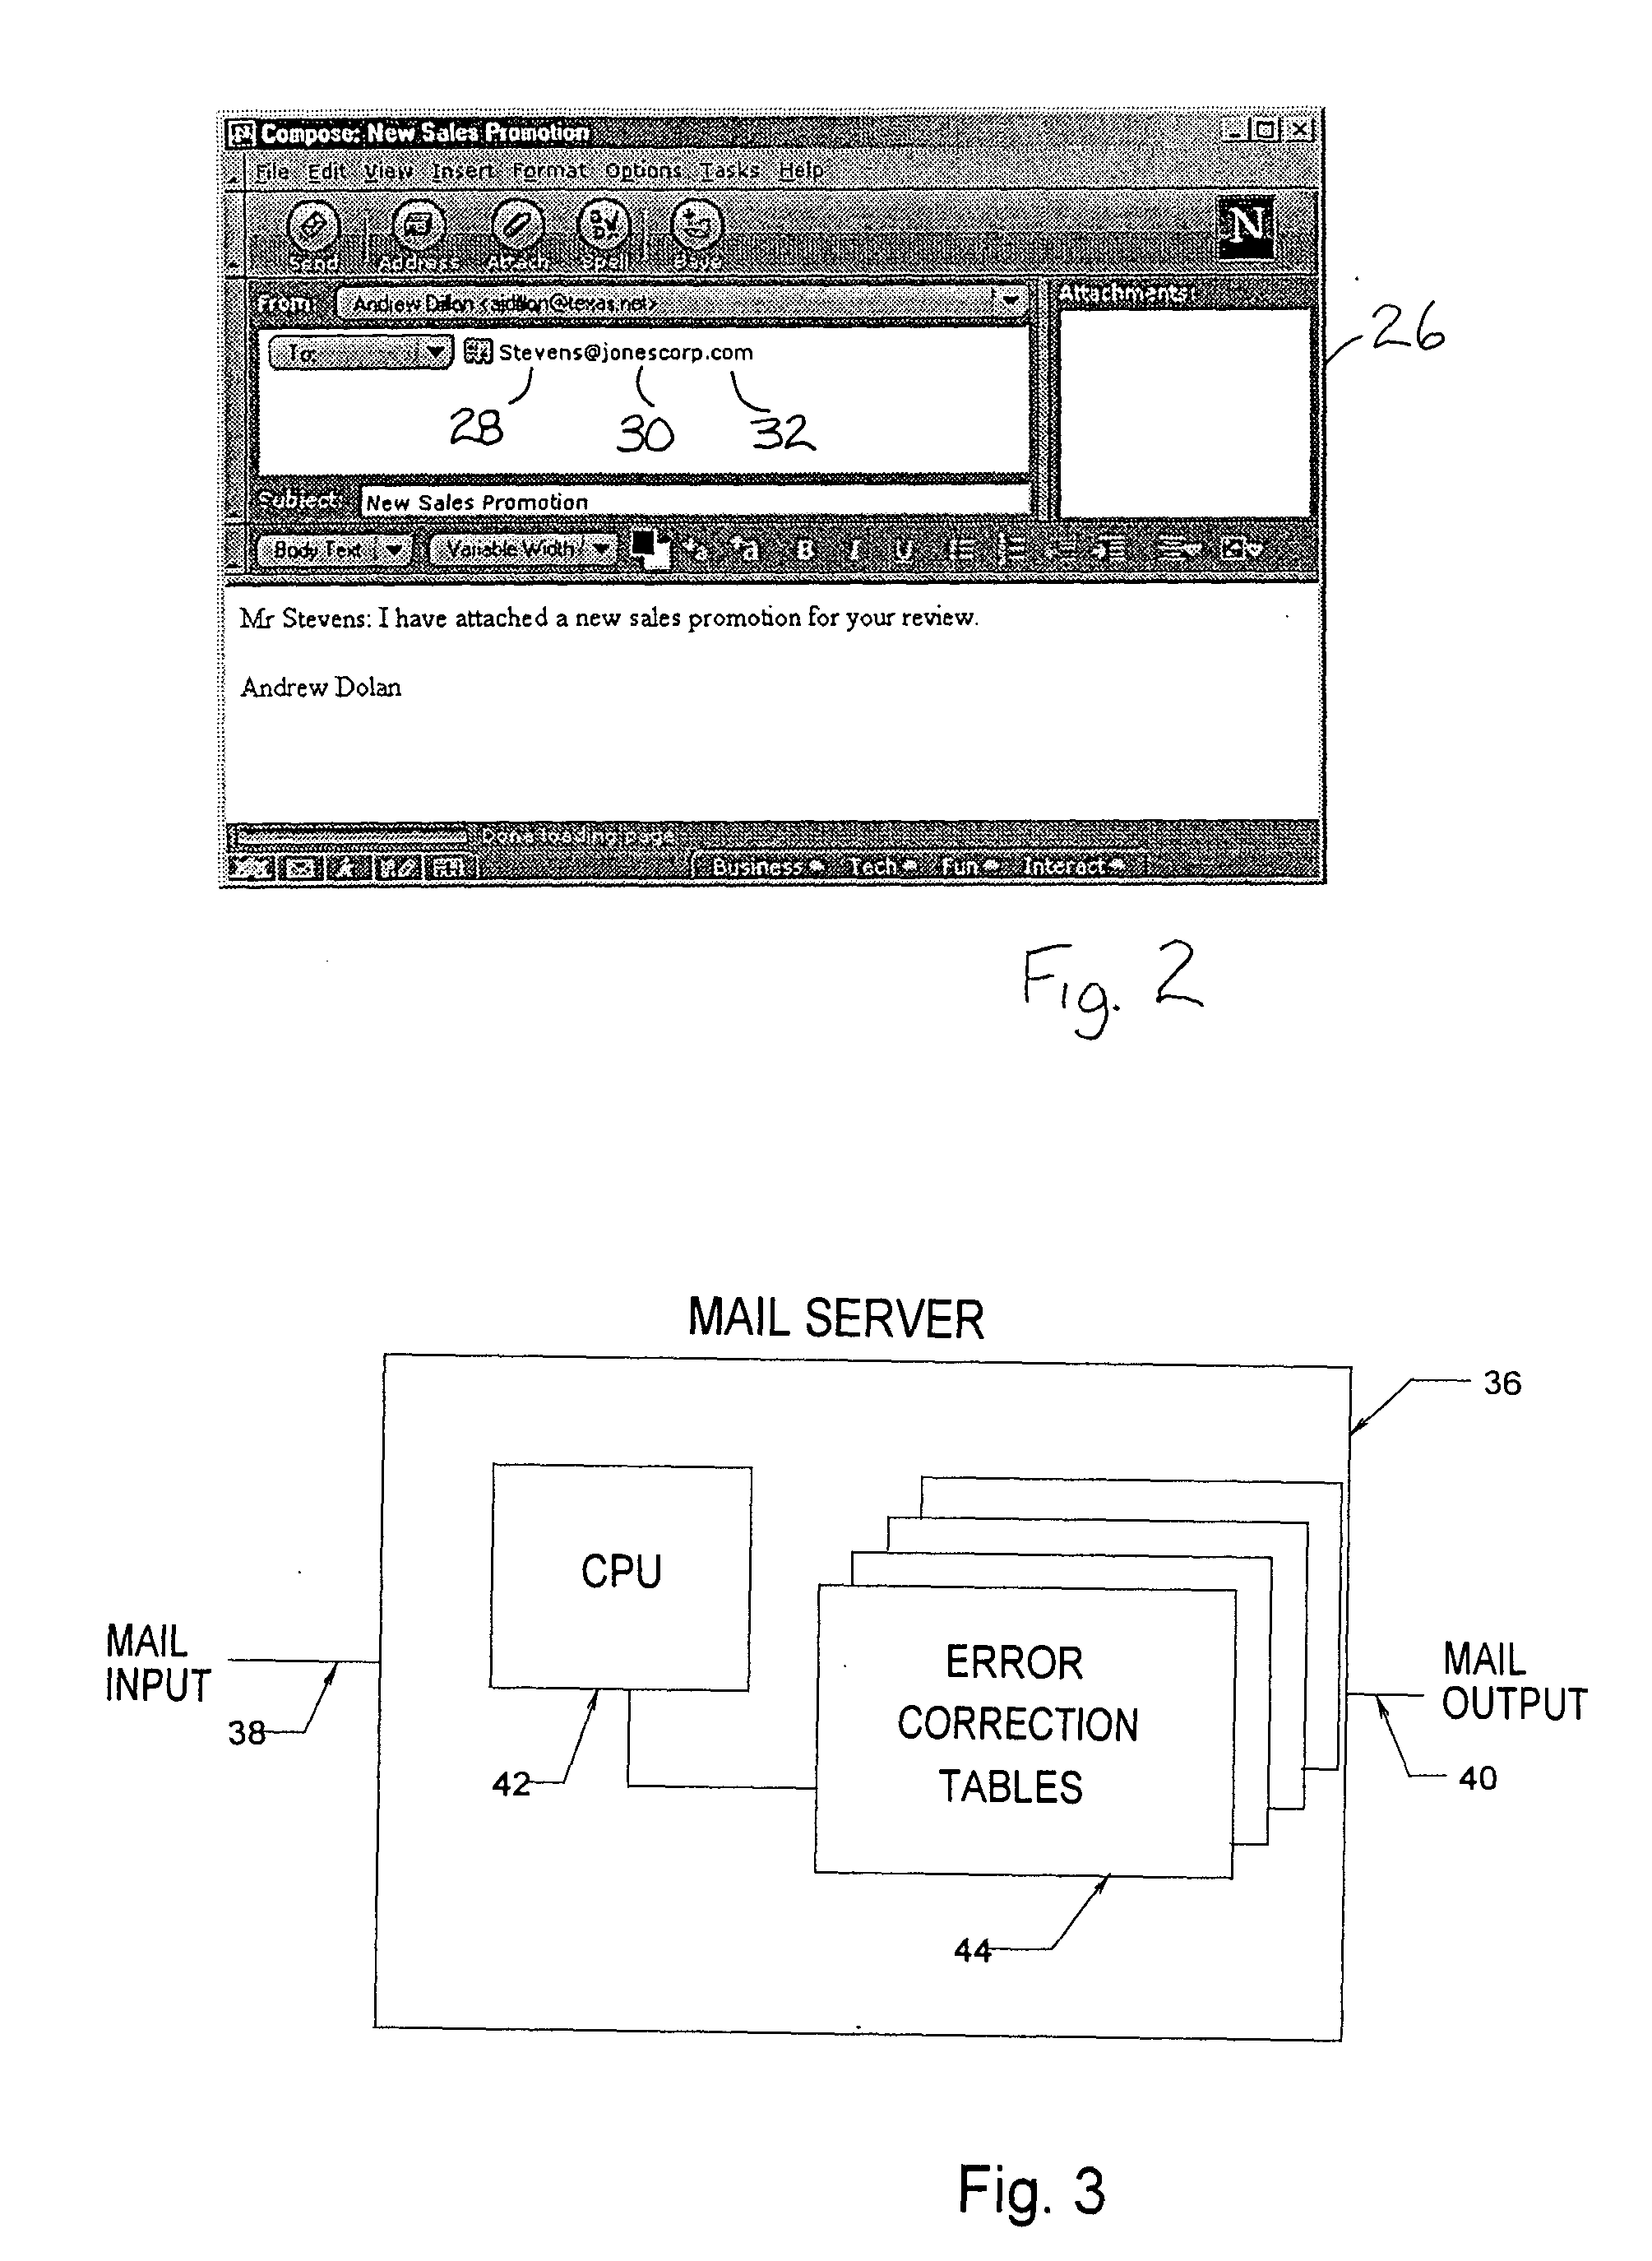 Method and system for automatic error recovery in an electronic mail system